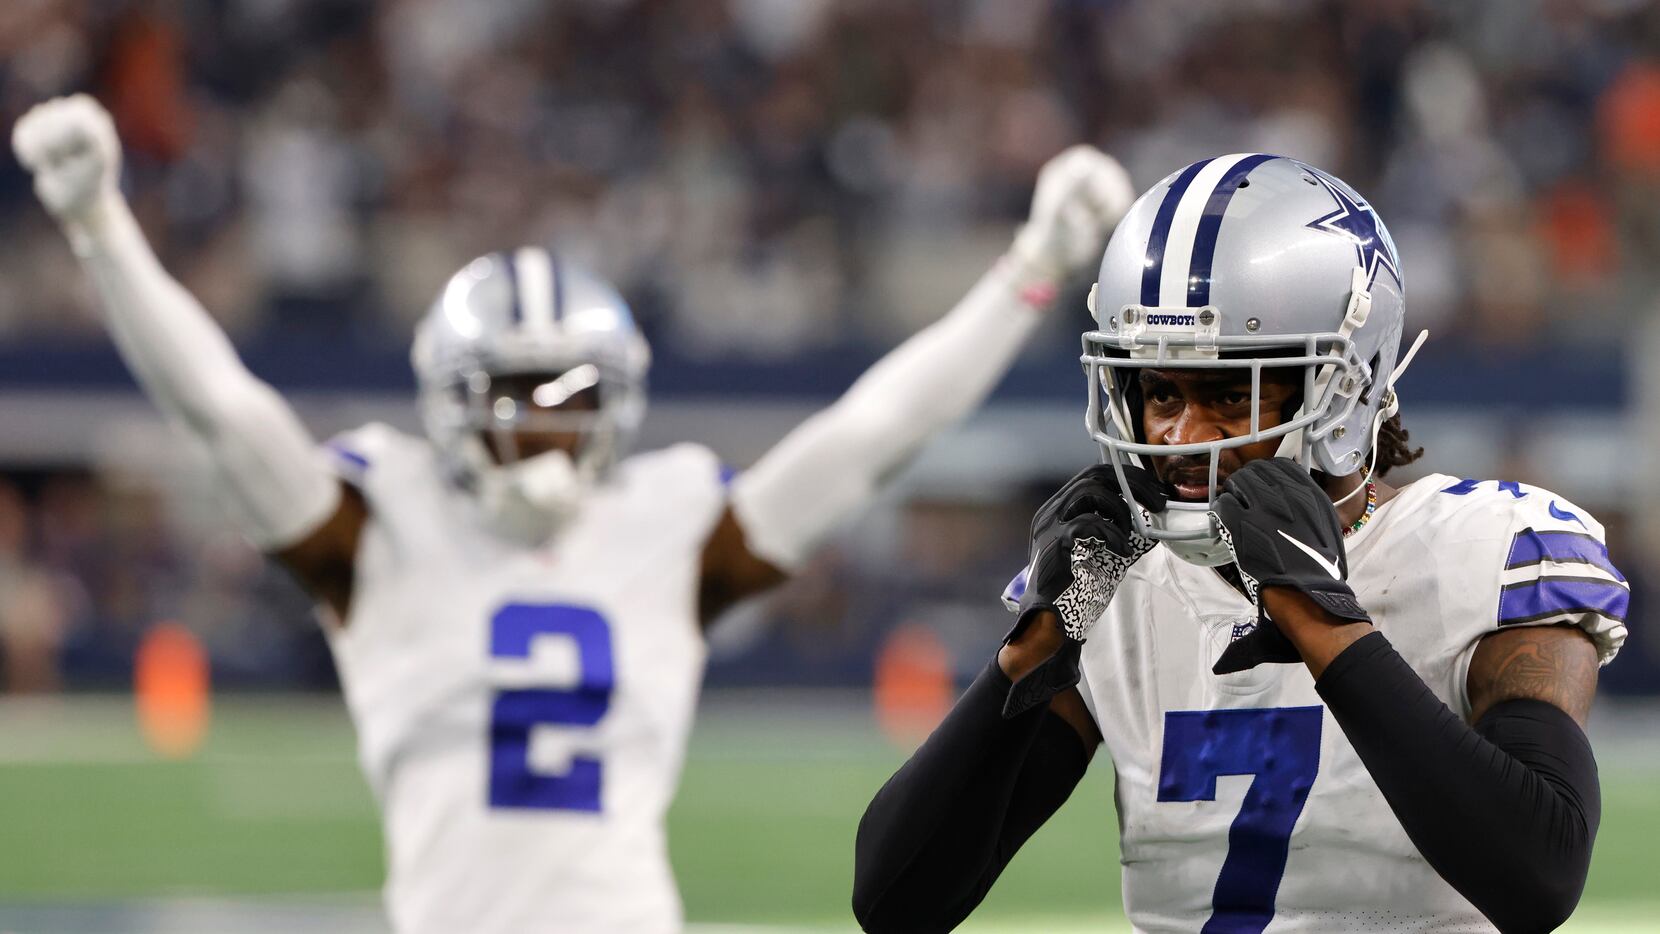 Get it done': Trevon Diggs set up Cowboys game-winning drive despite  communication issues